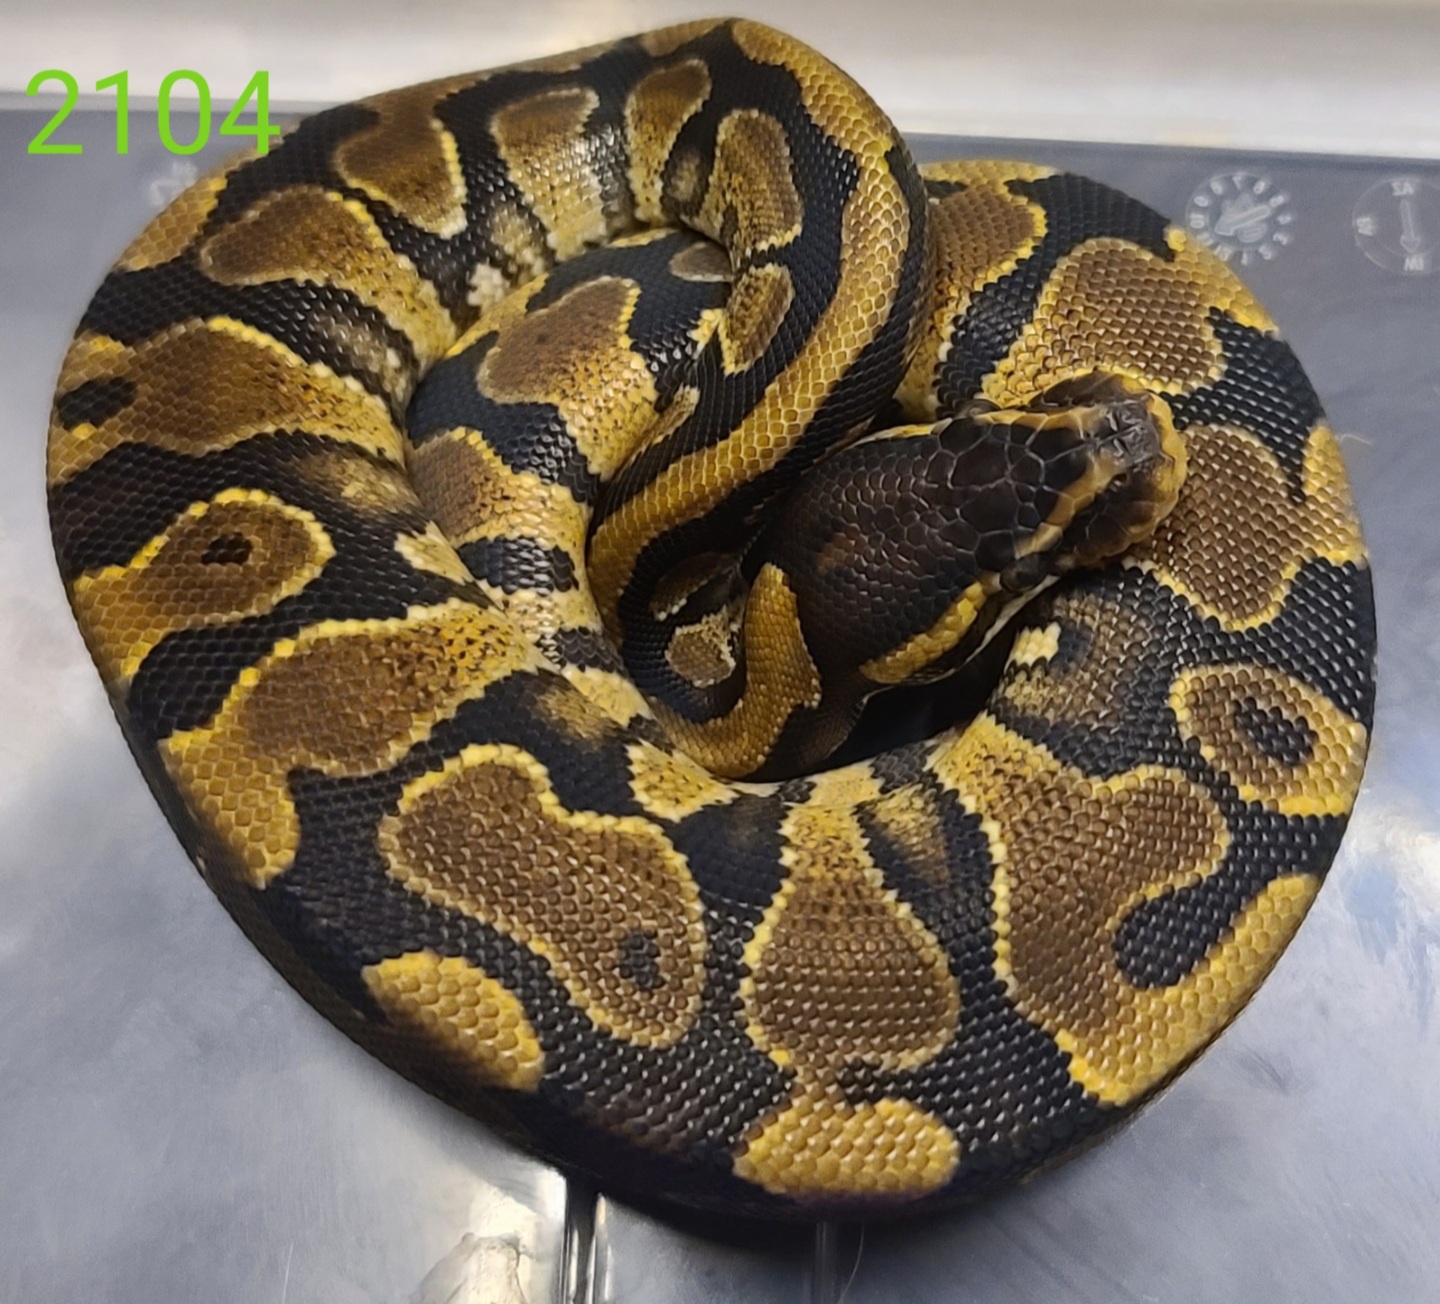 Gravel Ball Python by Open Road Constrictors